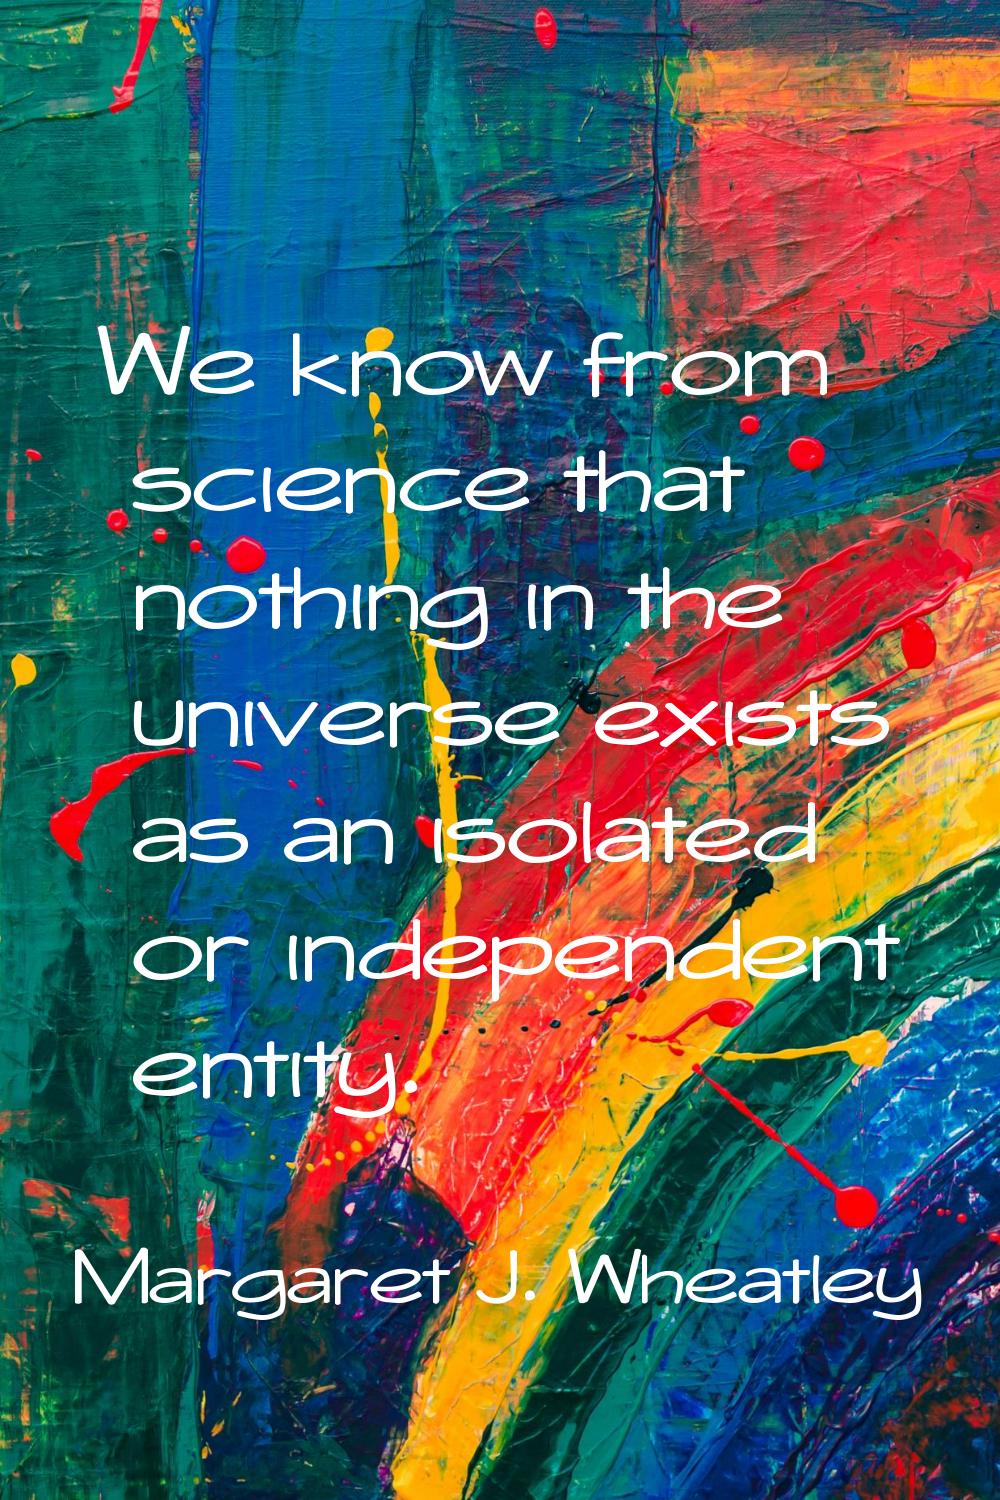 We know from science that nothing in the universe exists as an isolated or independent entity.